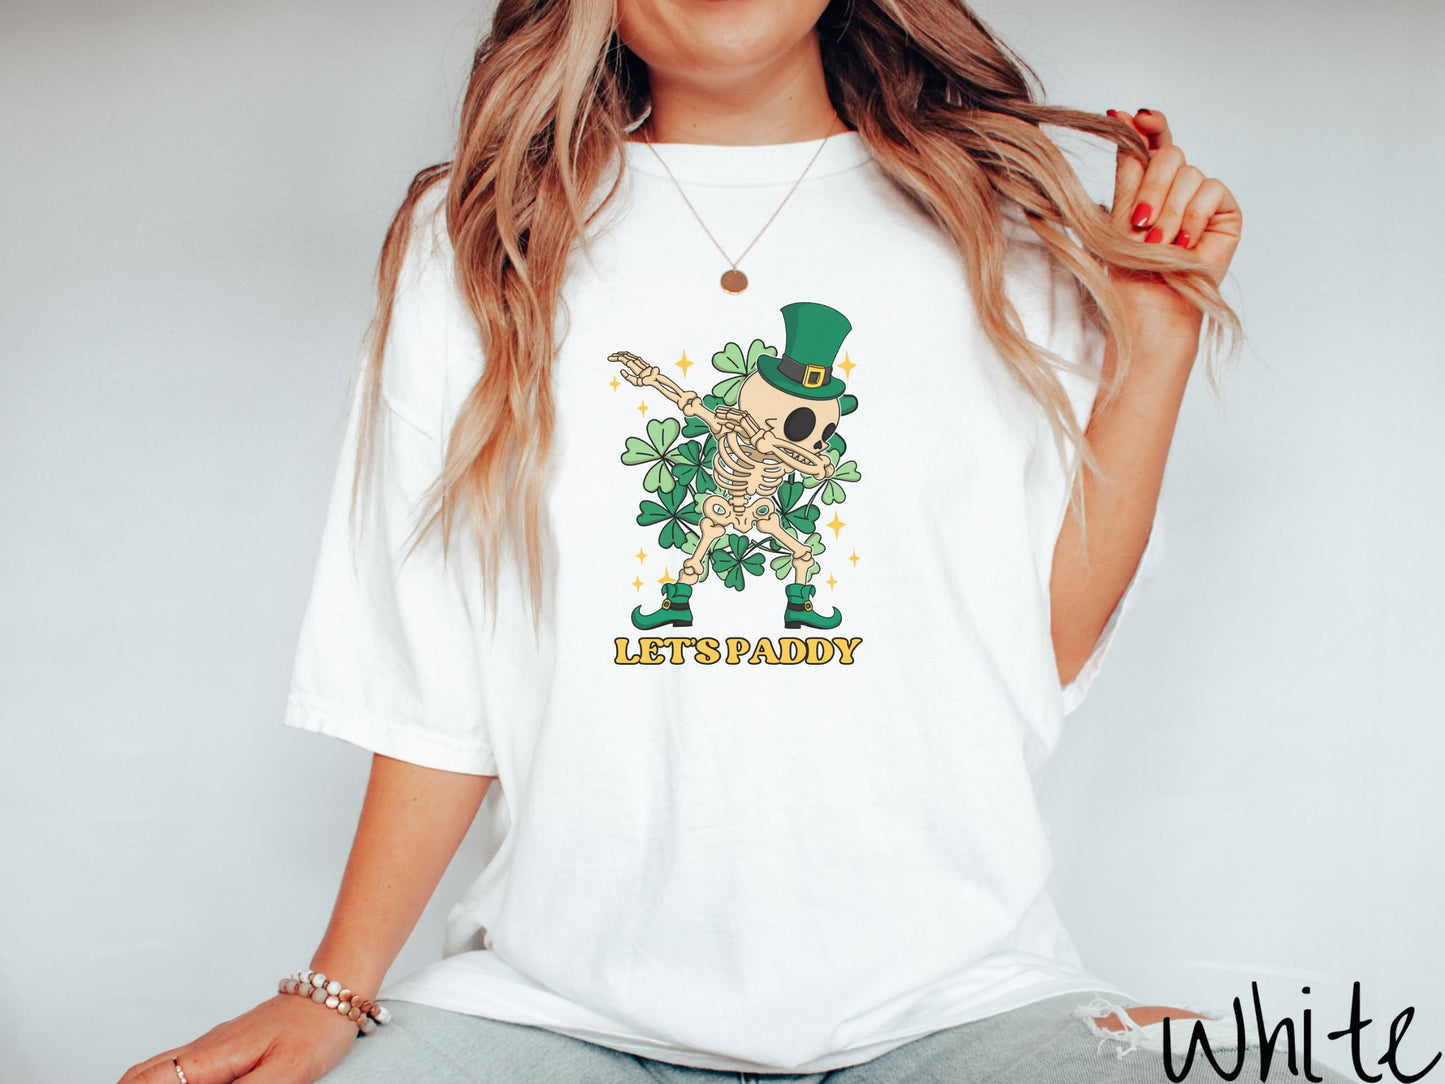 A woman wearing a vintage, white colored shirt with the text Lets Paddy and below that is a leprechaun wearing a green top hat and green elf shoes doing the dab dance and there are green clovers and golden stars in the background.